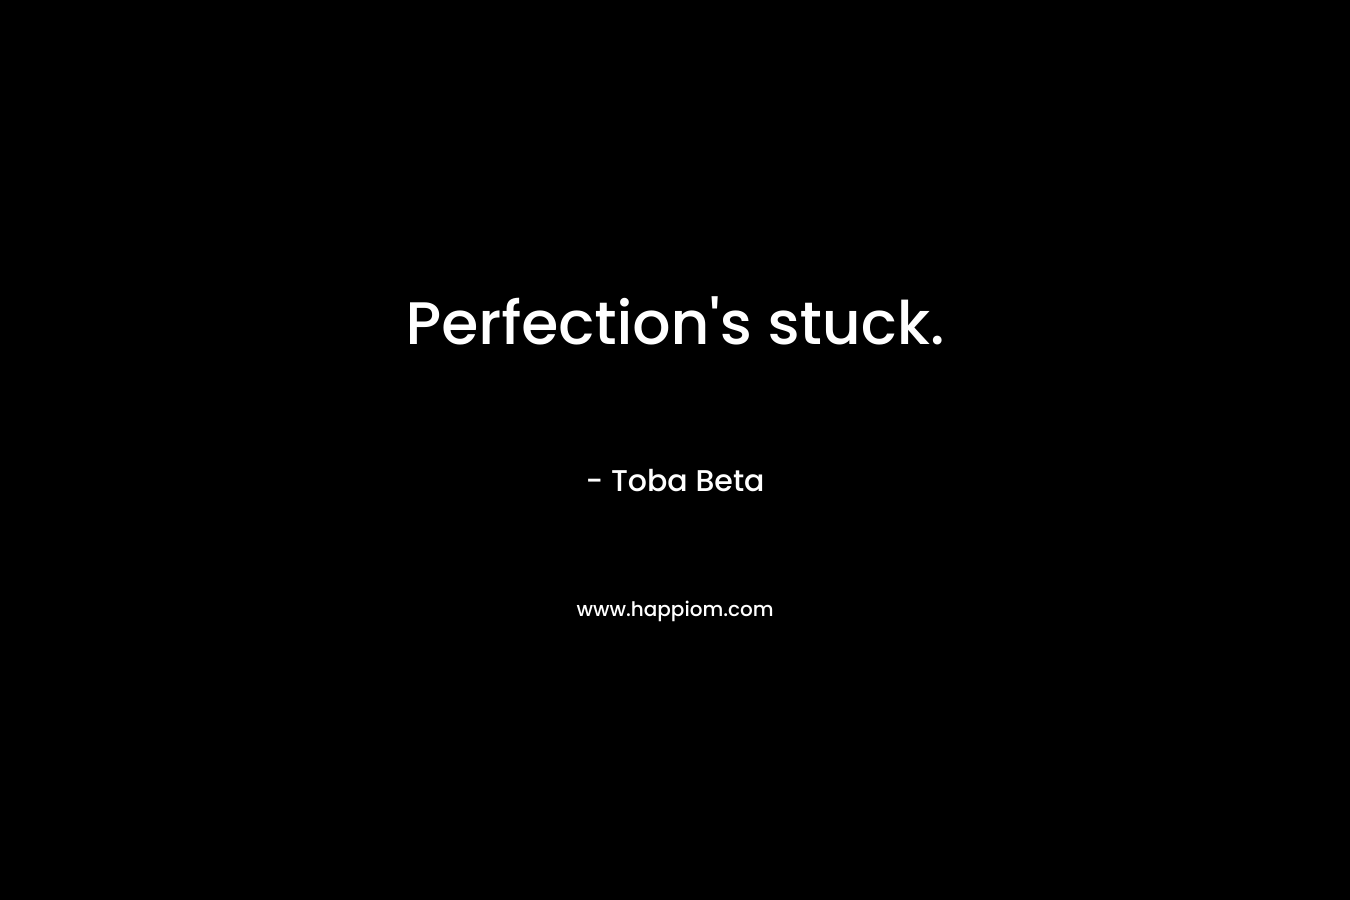 Perfection's stuck.